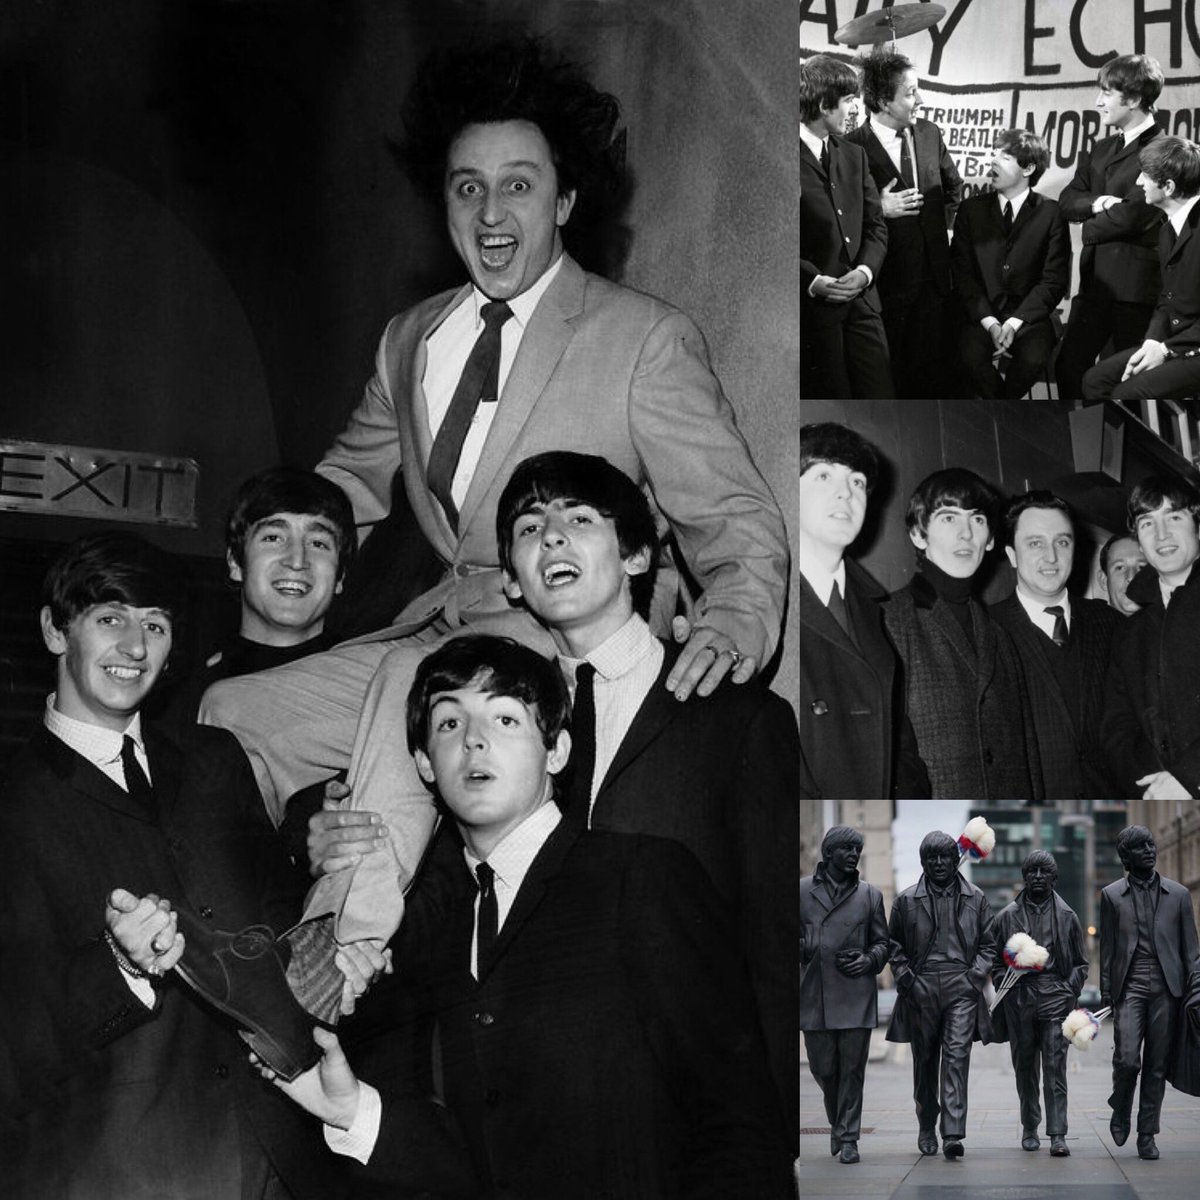 Remembering the legend one year on 
Ken Dodd 1927-2018 

#KenDodd #comedian #knottyash #liverpool #icon #Beatles #tears #Happiness #diddymen #ticklingstick